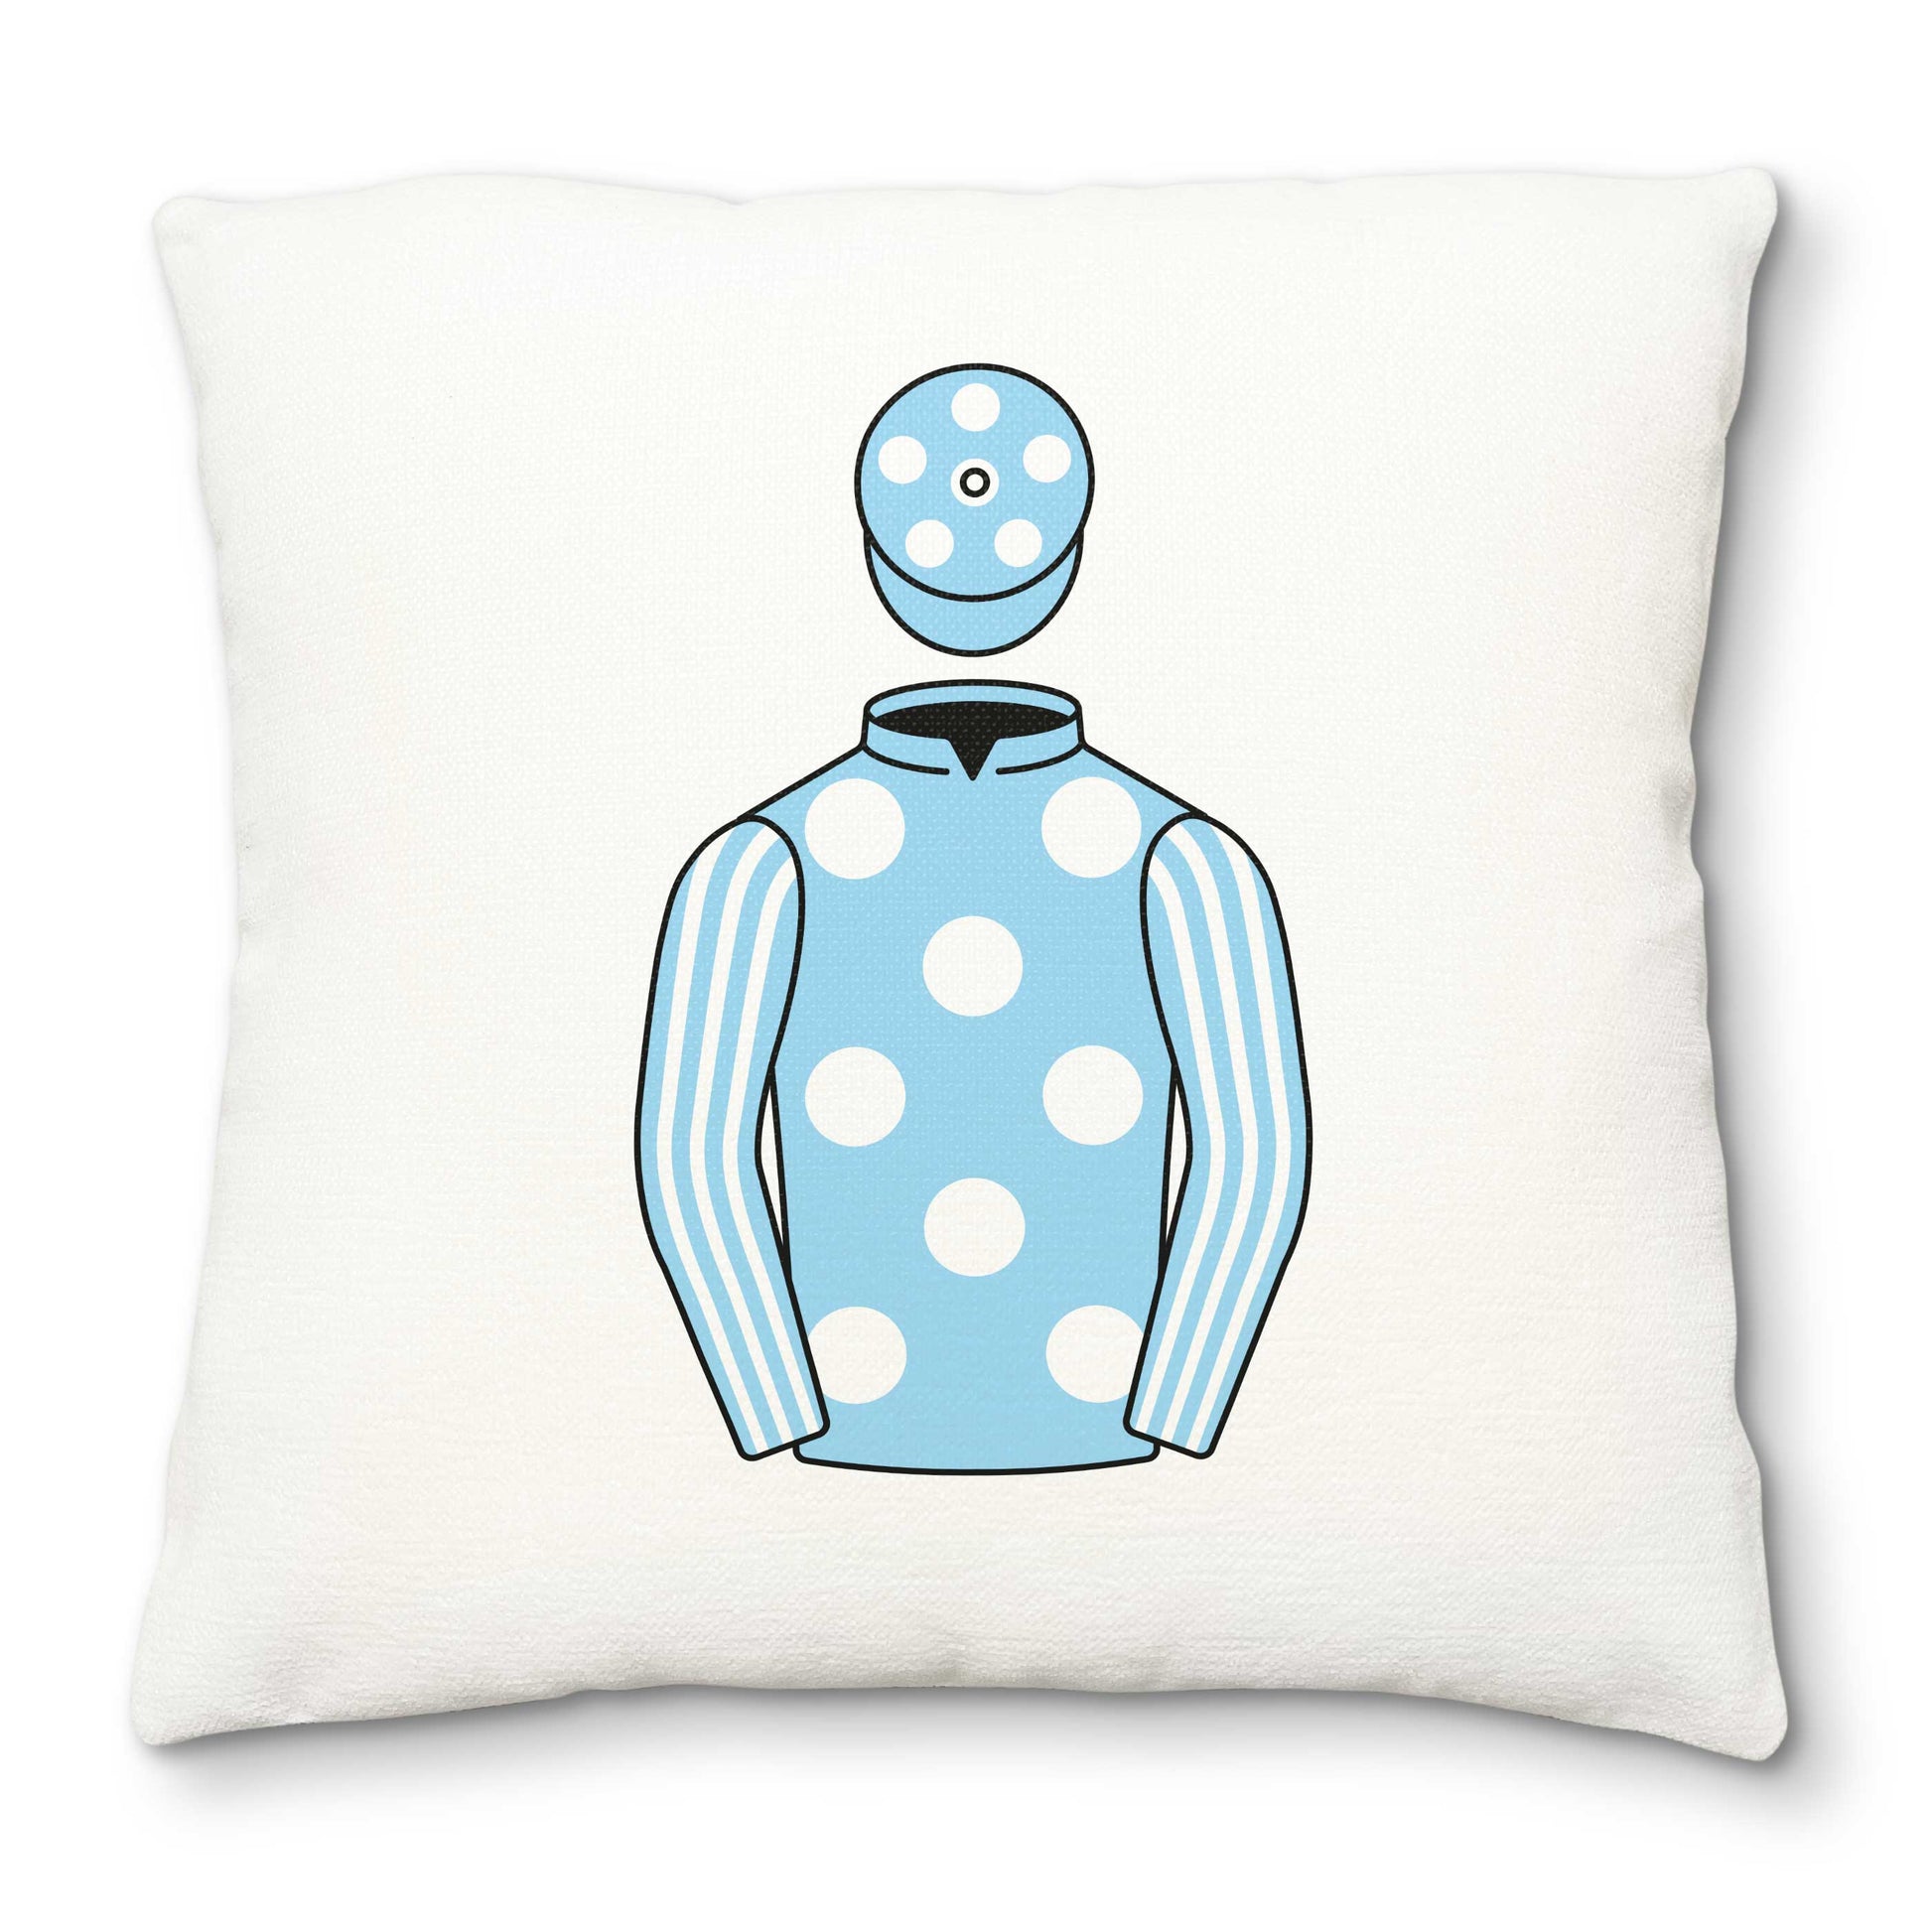 Kenneth Alexander Deluxe Cushion Cover - Deluxe Cushion Cover - Hacked Up